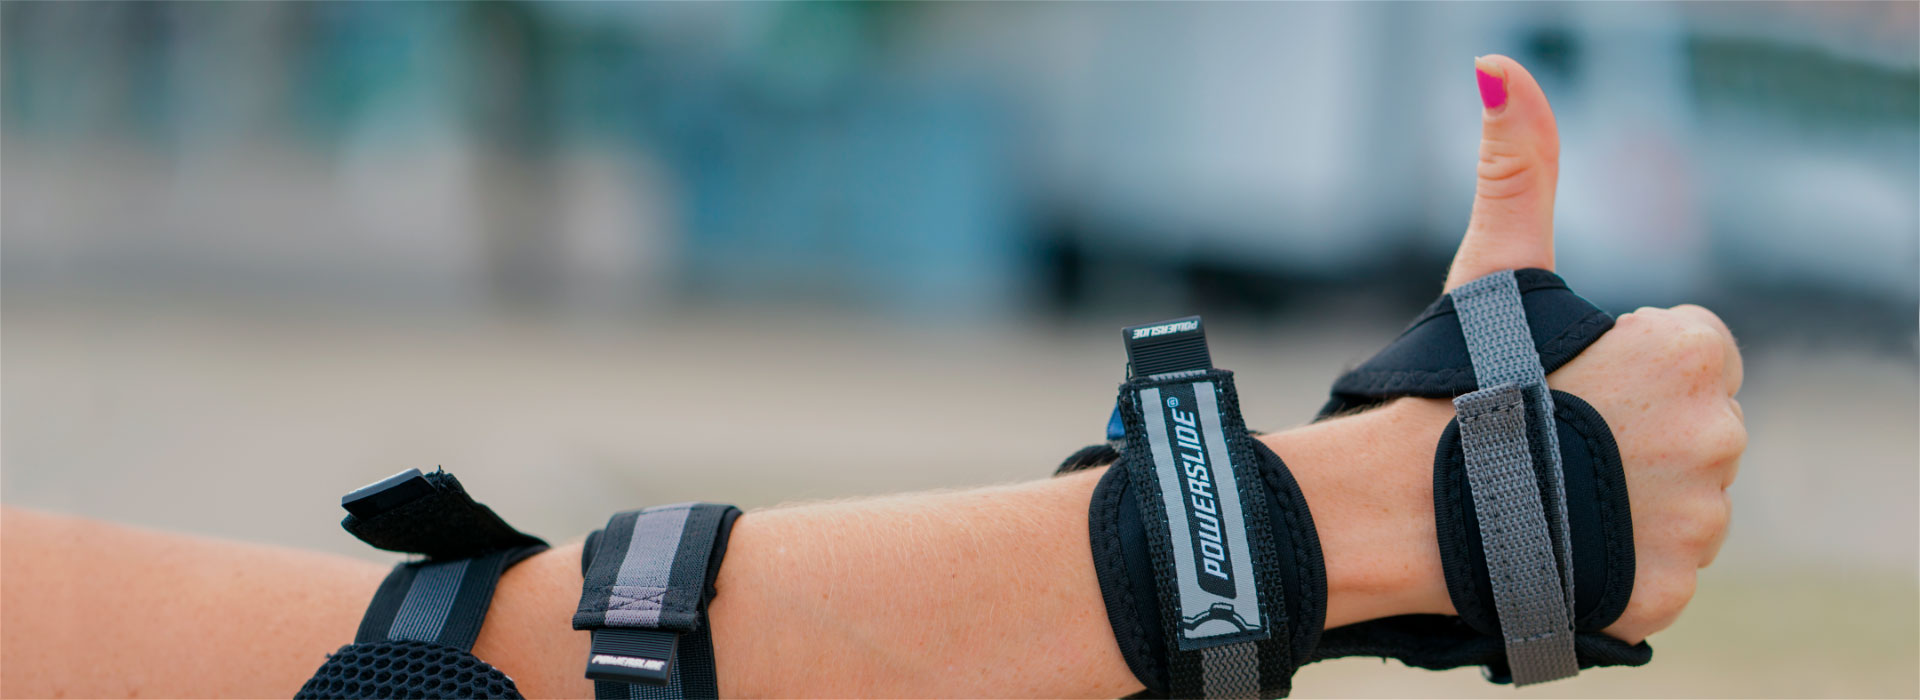 A close-up image of a person wearing a Powerslide wristguard and giving a thumbs up 